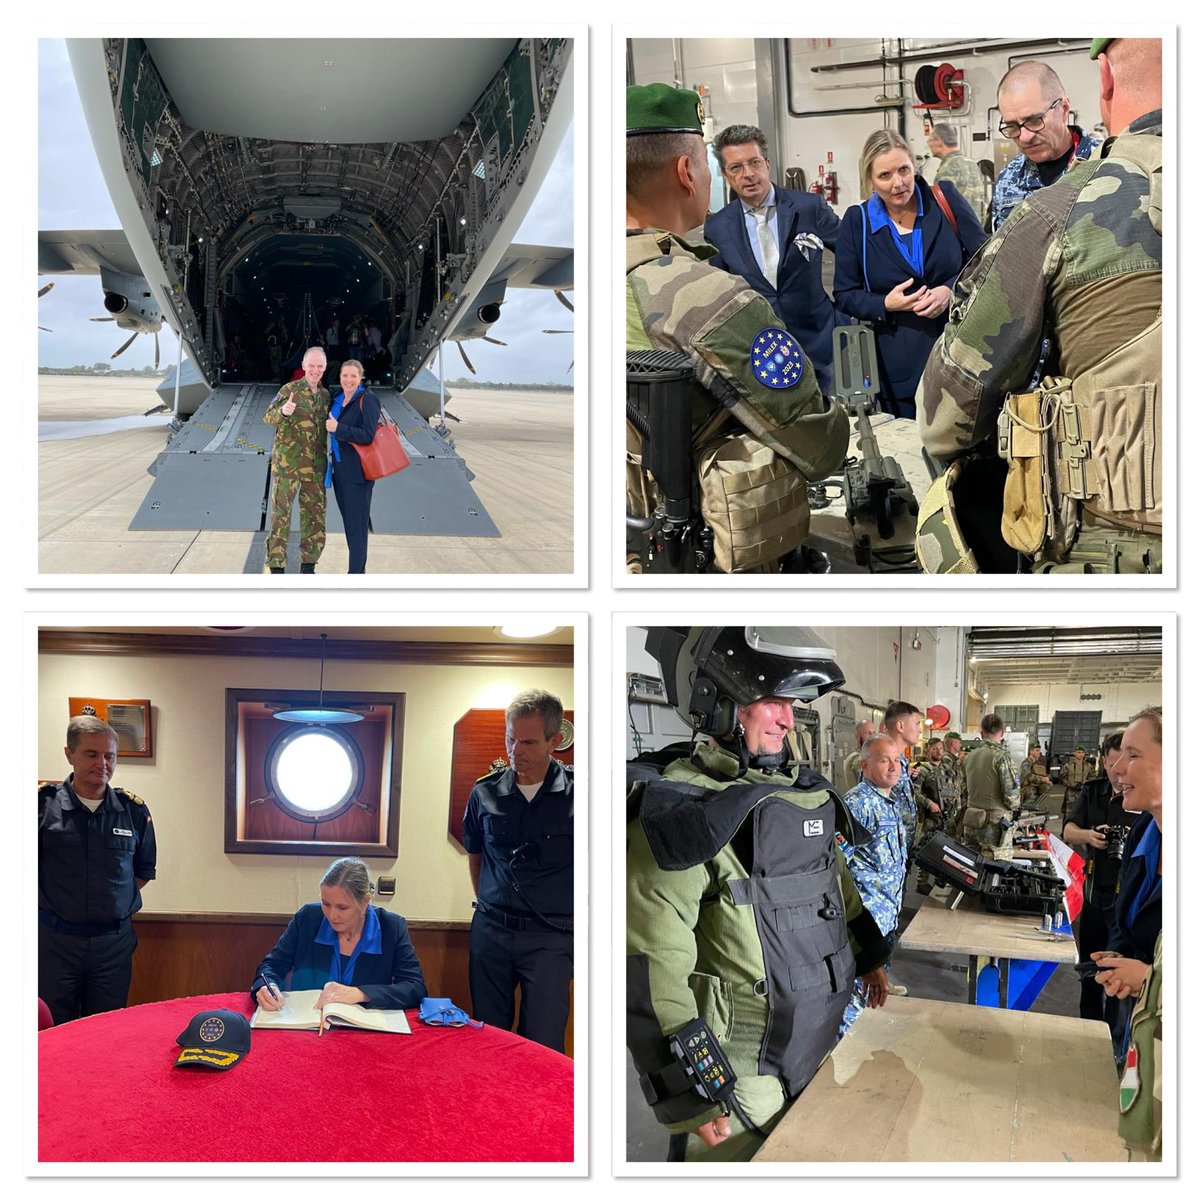 Impressed to see part of 🇪🇺#MILEX23 in 🇪🇸 today. 2,800 troops. 31 military units. 19 EU Member States: EU’s first-ever joint live military exercise. 
As @JosepBorrellF said “building a 🇪🇺security & defence policy fit for the future”
Gracias @Defensagob @EMADmde 
#StrategicCompass